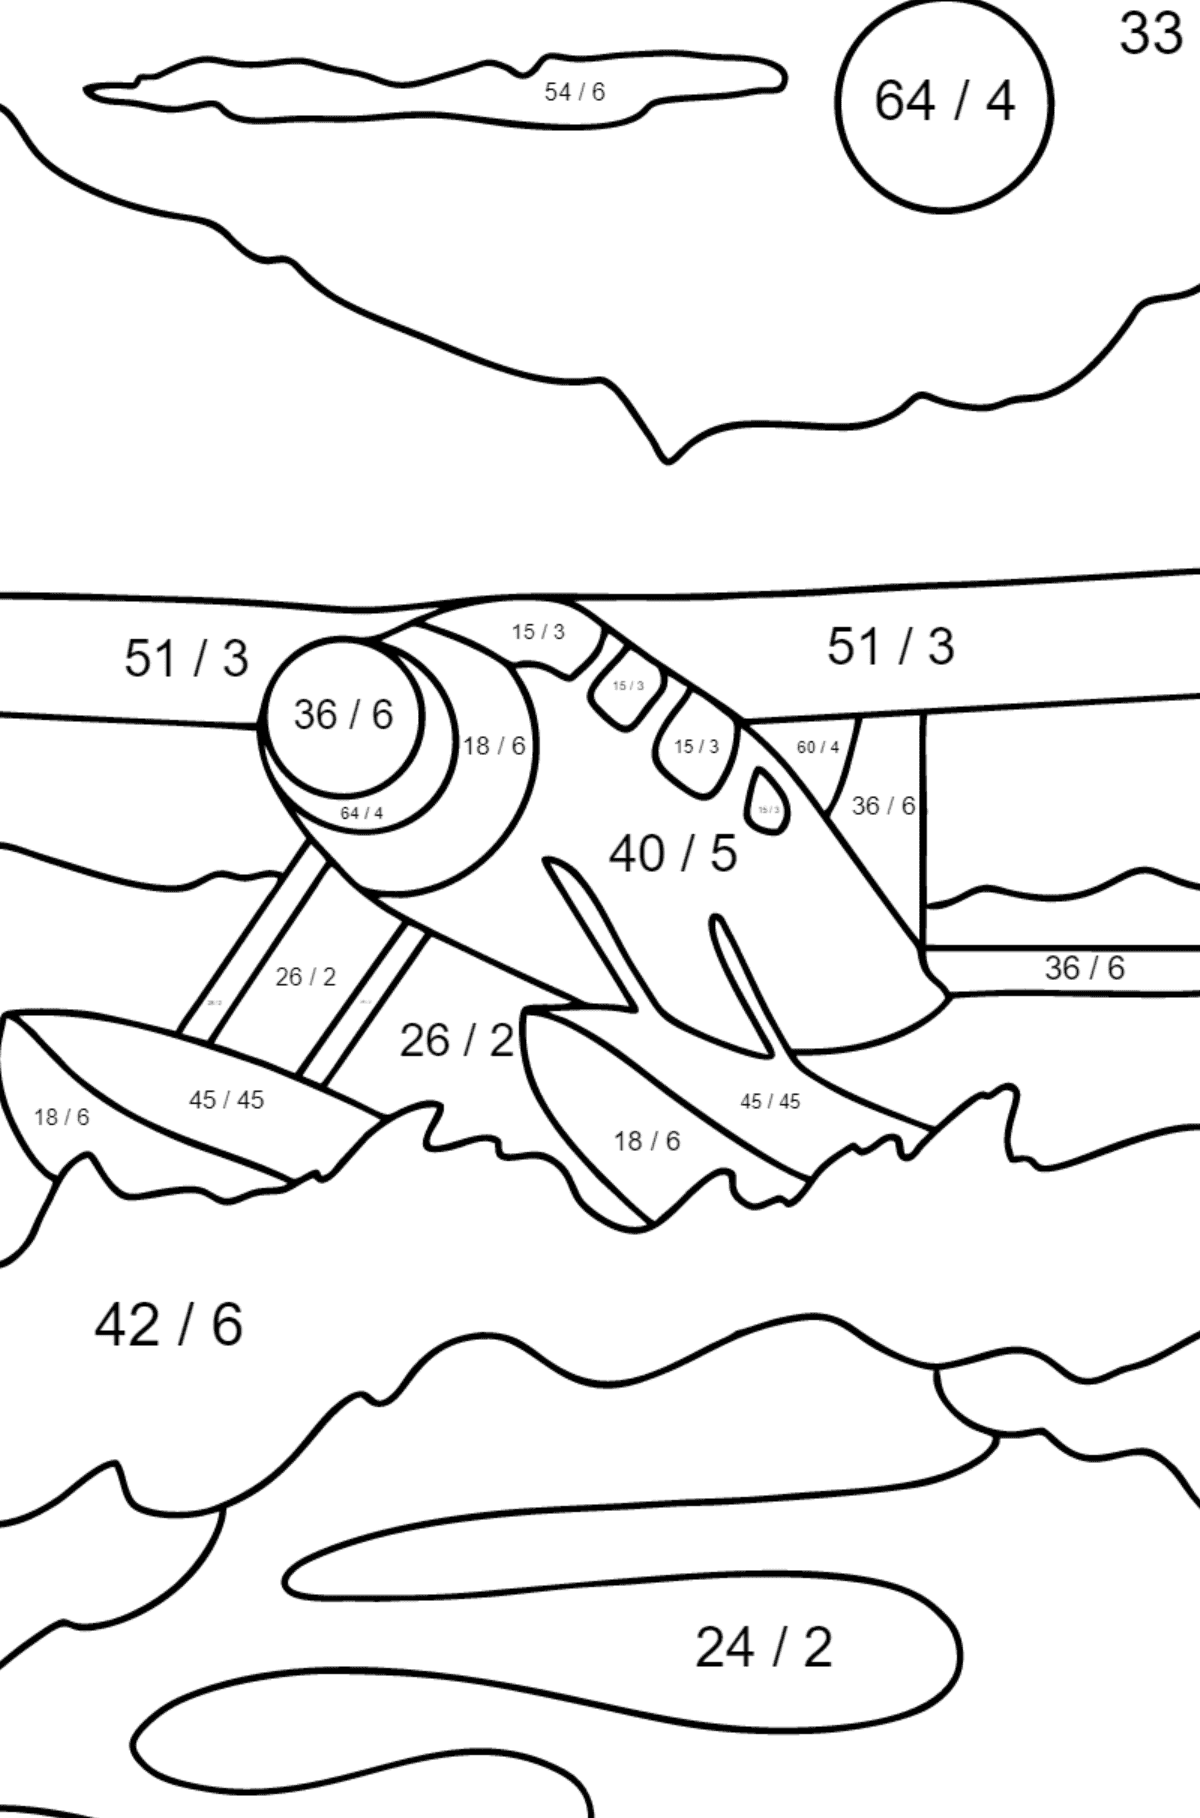 Coloring Page - A Hydroplane - Math Coloring - Division for Children